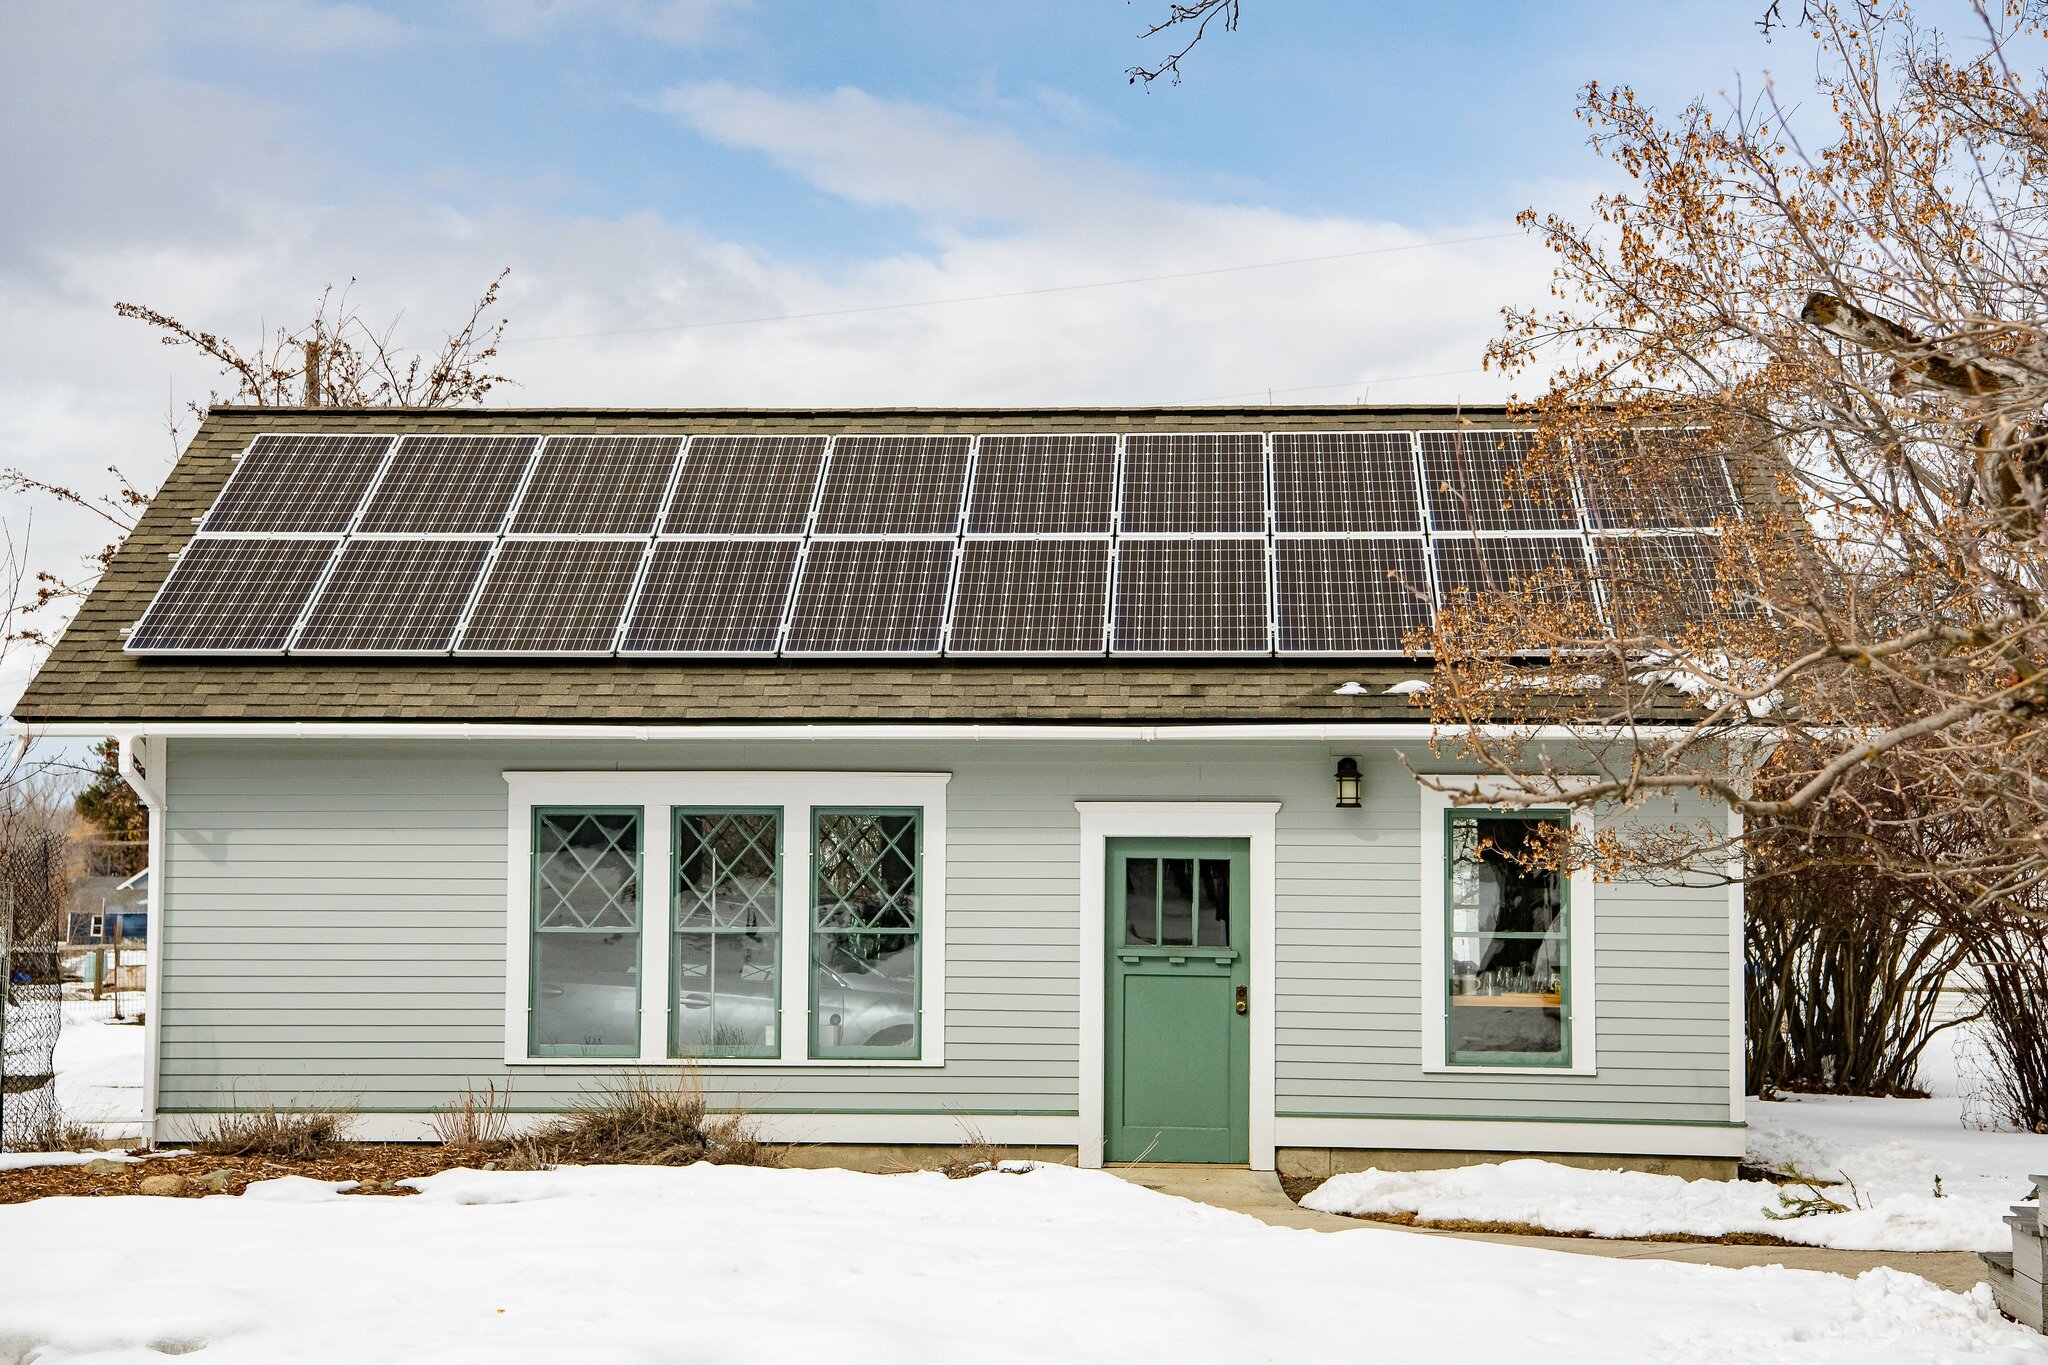 Our Community Energy Program is seeking input on energy needs in Wallowa County. Your input is part of a county-wide effort to plan for energy self-reliance and security, including energy conservation, efficiency, local generation, resilience infrast